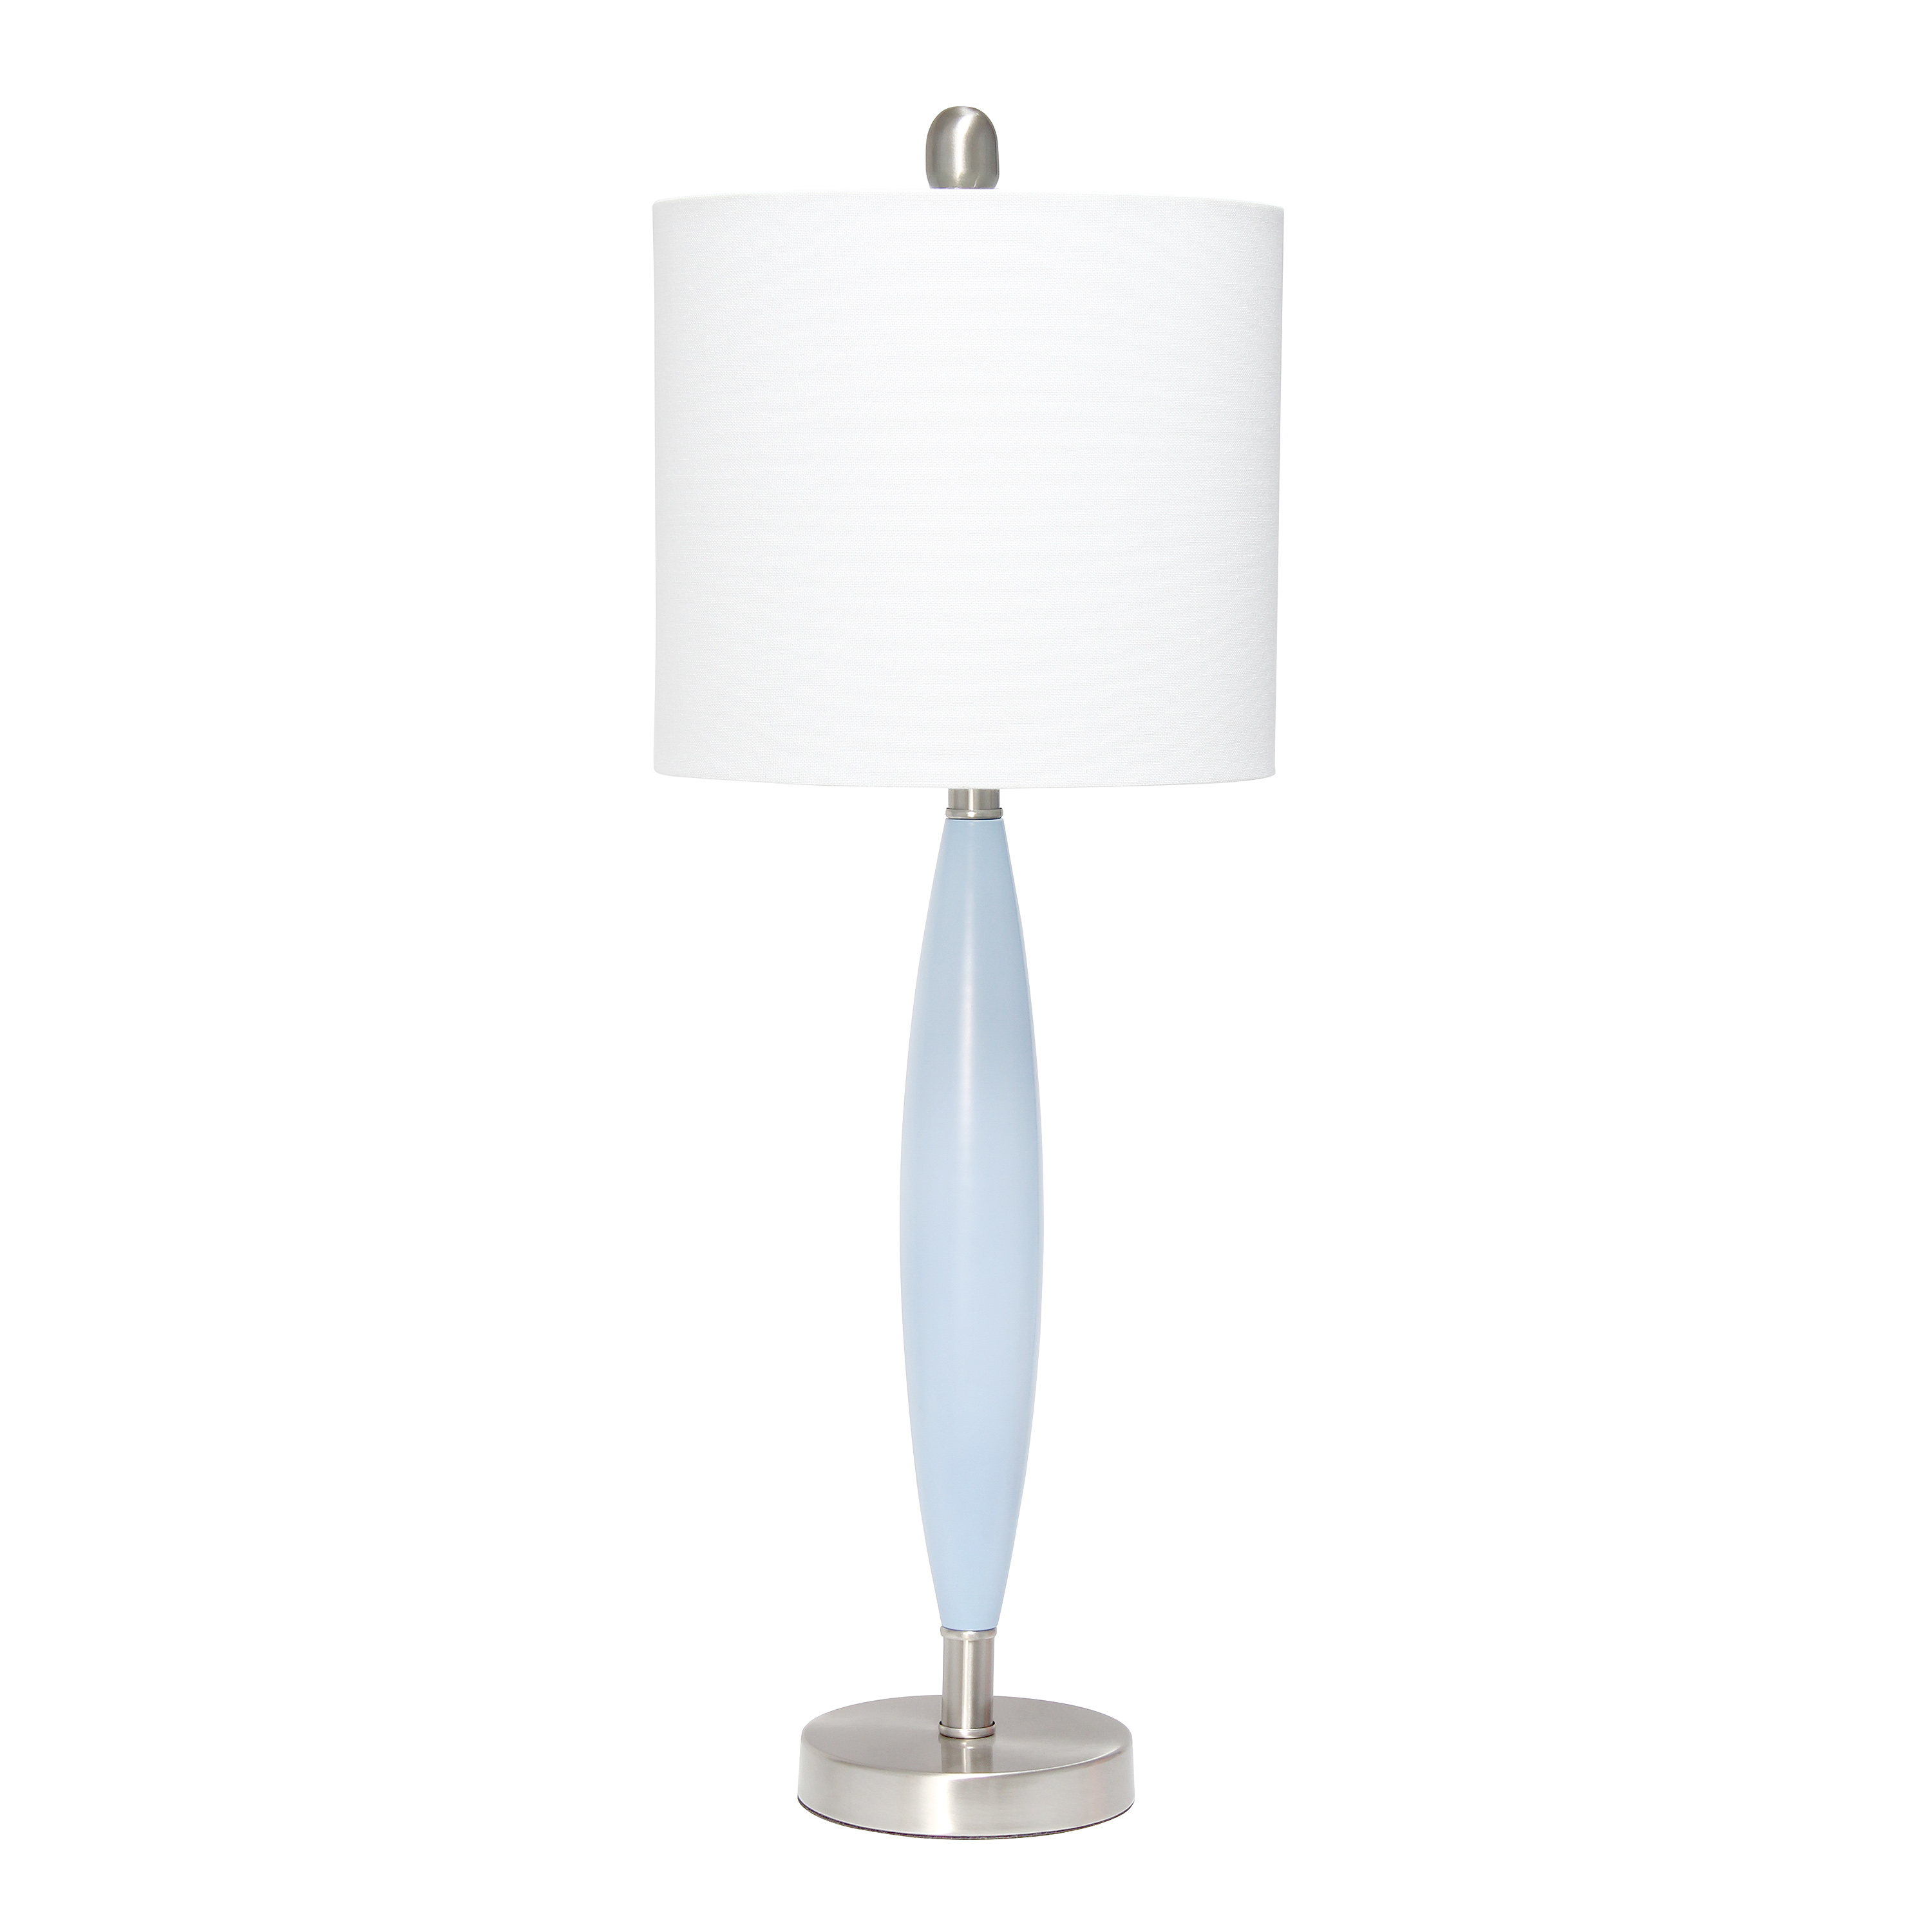 Lalia Home Stylus Table Lamp with White Fabric Shade, Blue